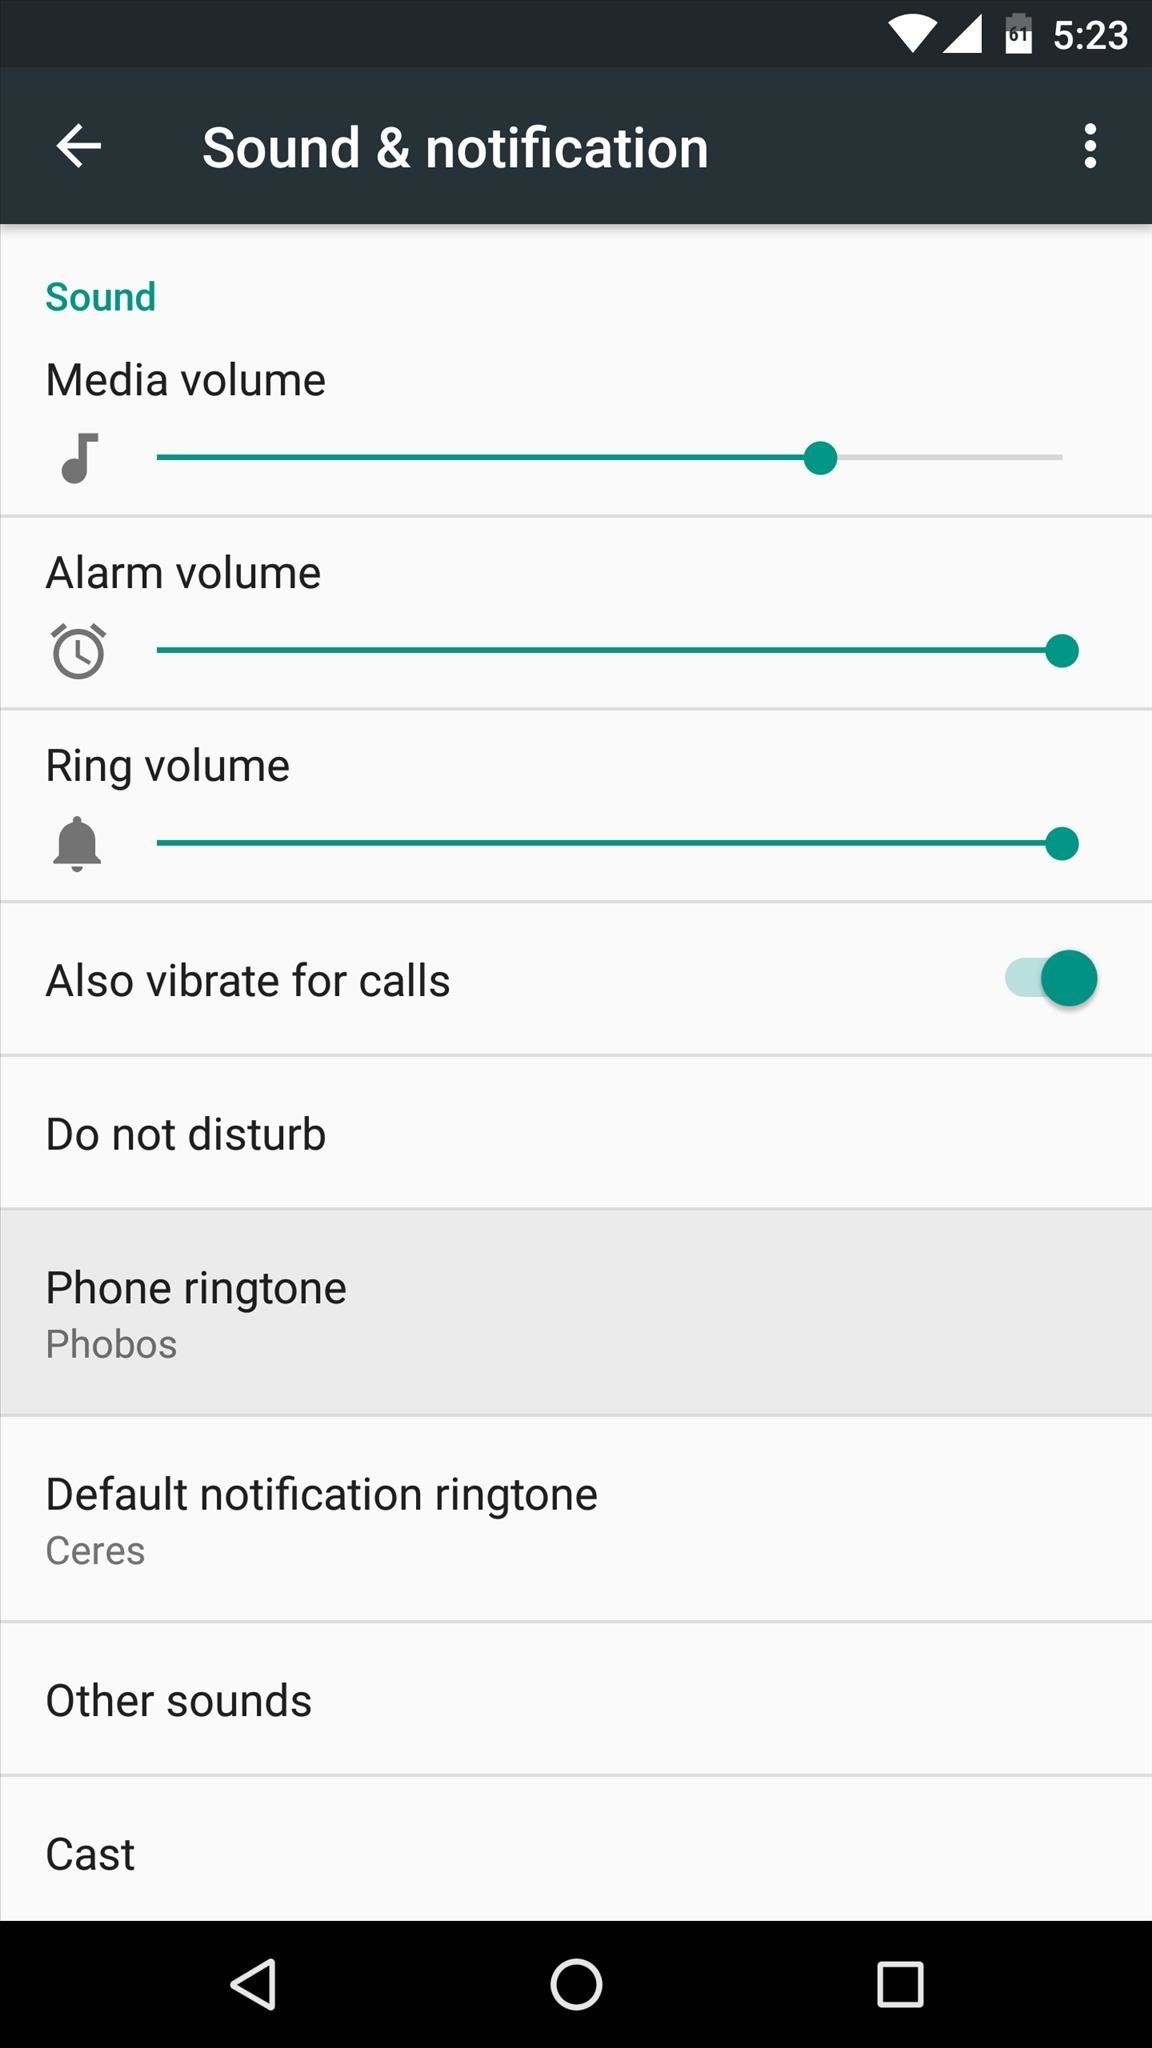 How to download a song for ringtone on android